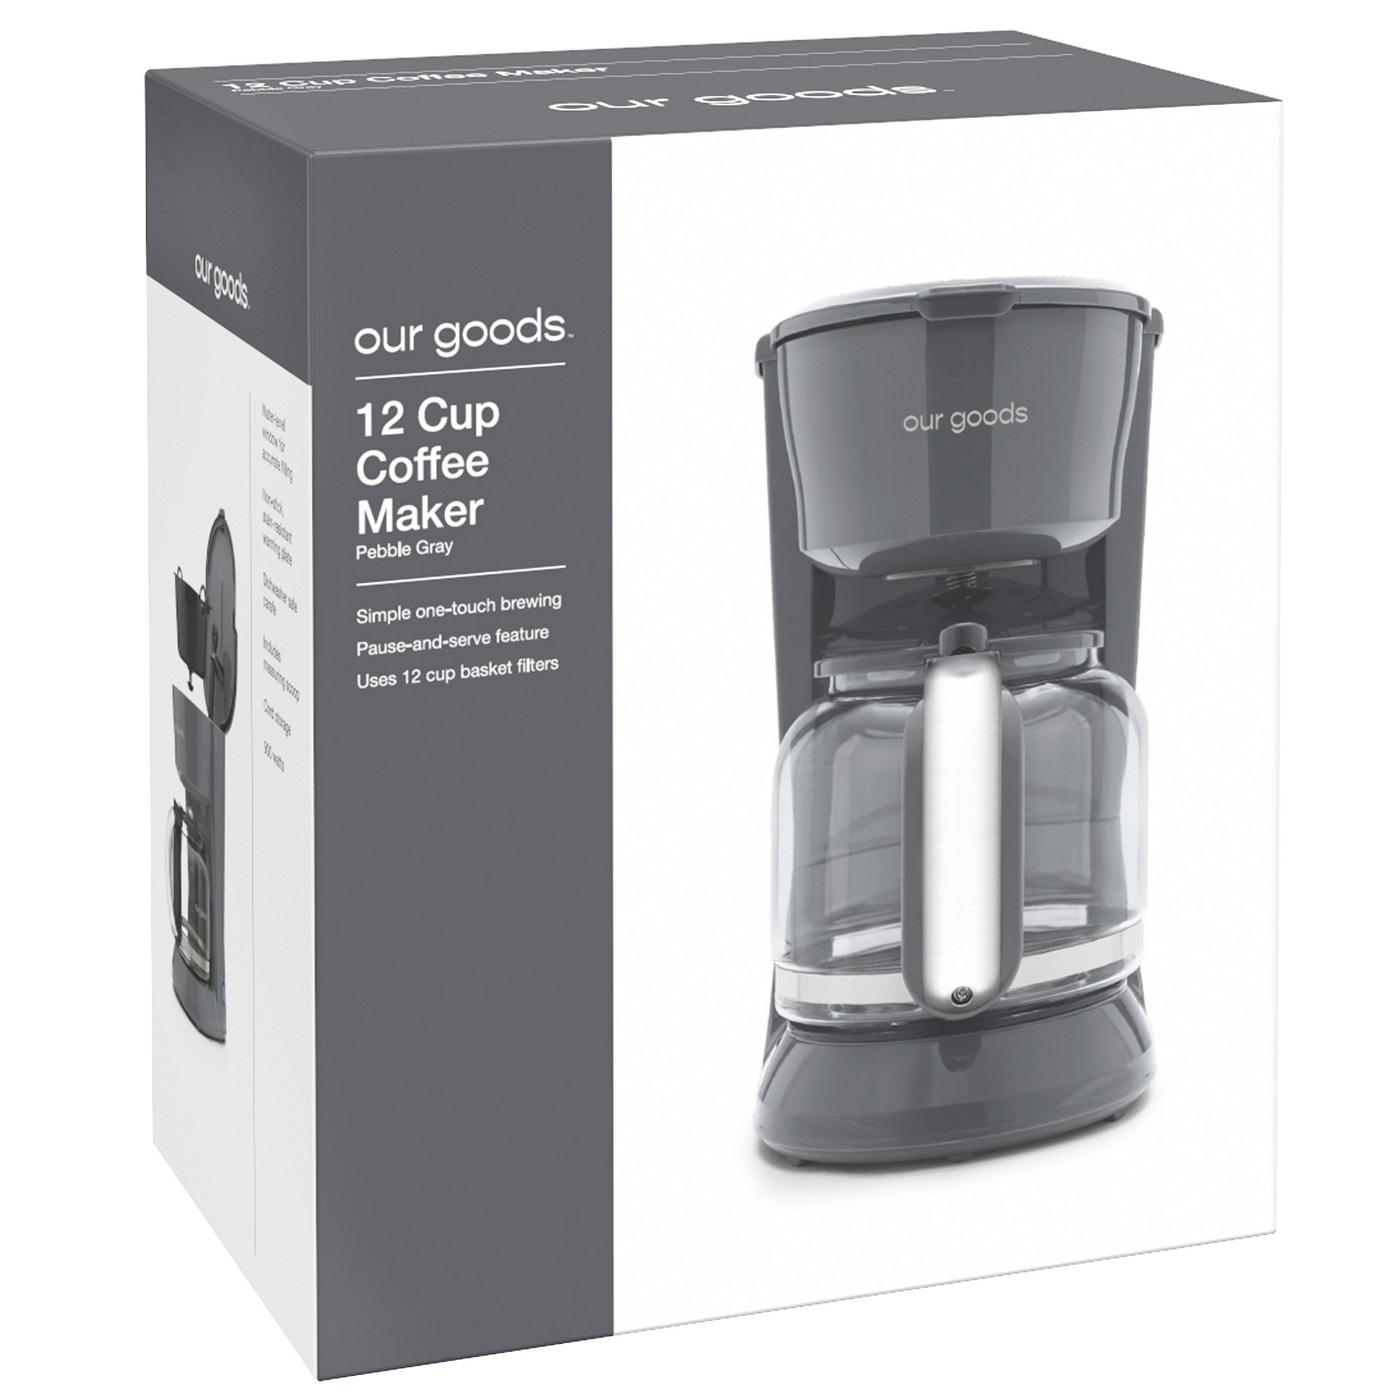 our goods Coffee Maker - Pebble Gray; image 3 of 3